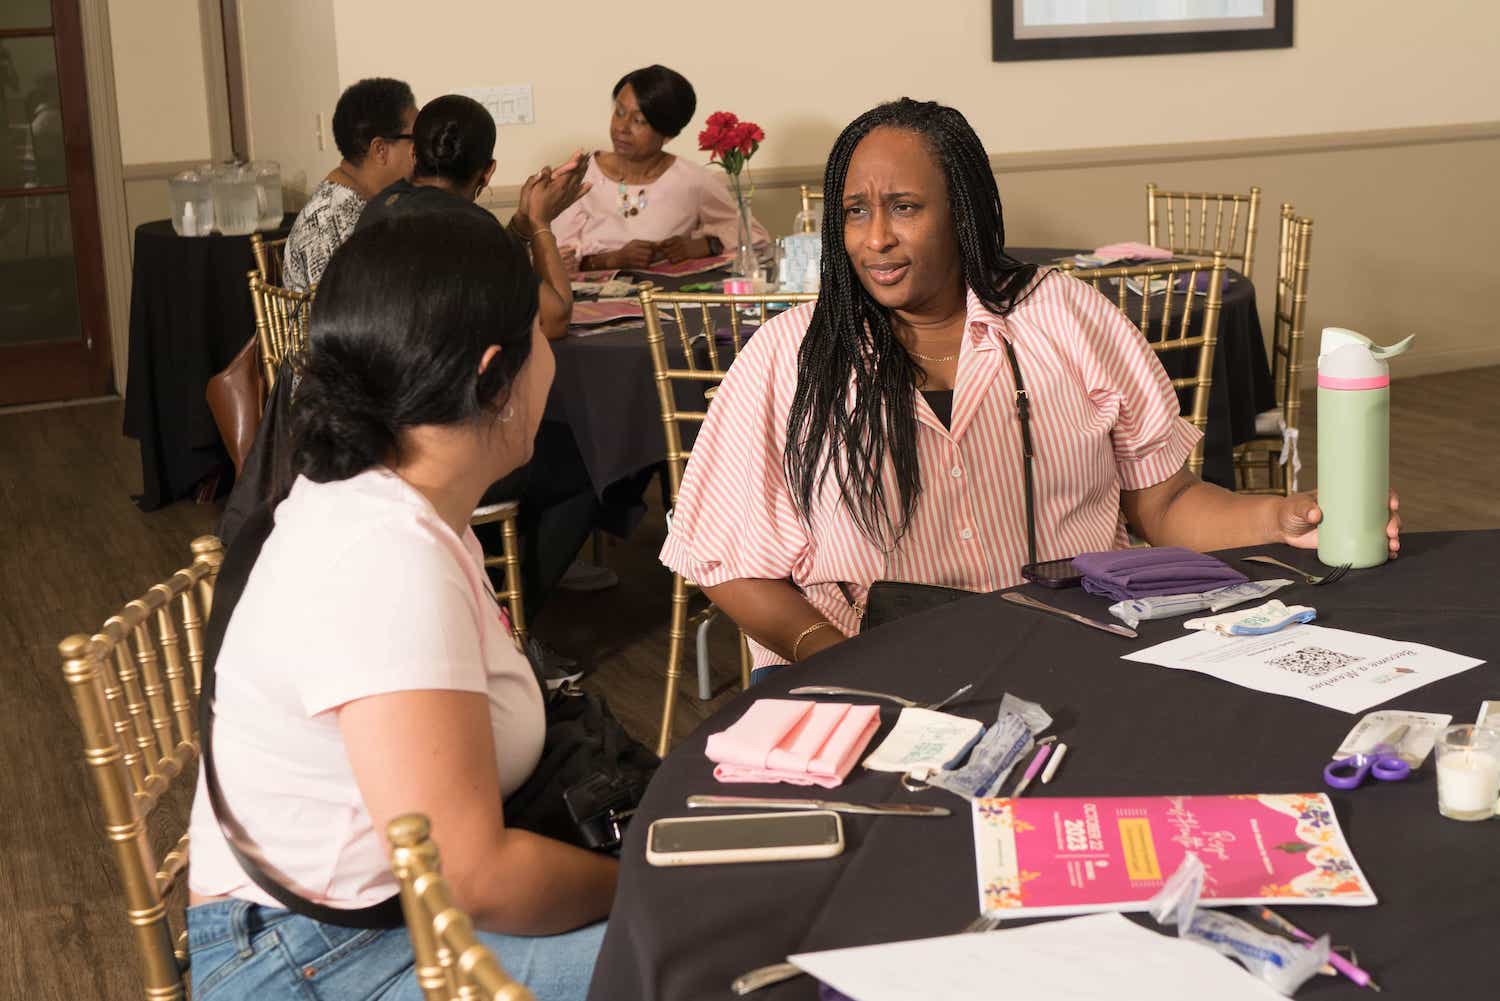 Black Women for Wellness Annual Risqué Breast Health Conference 69